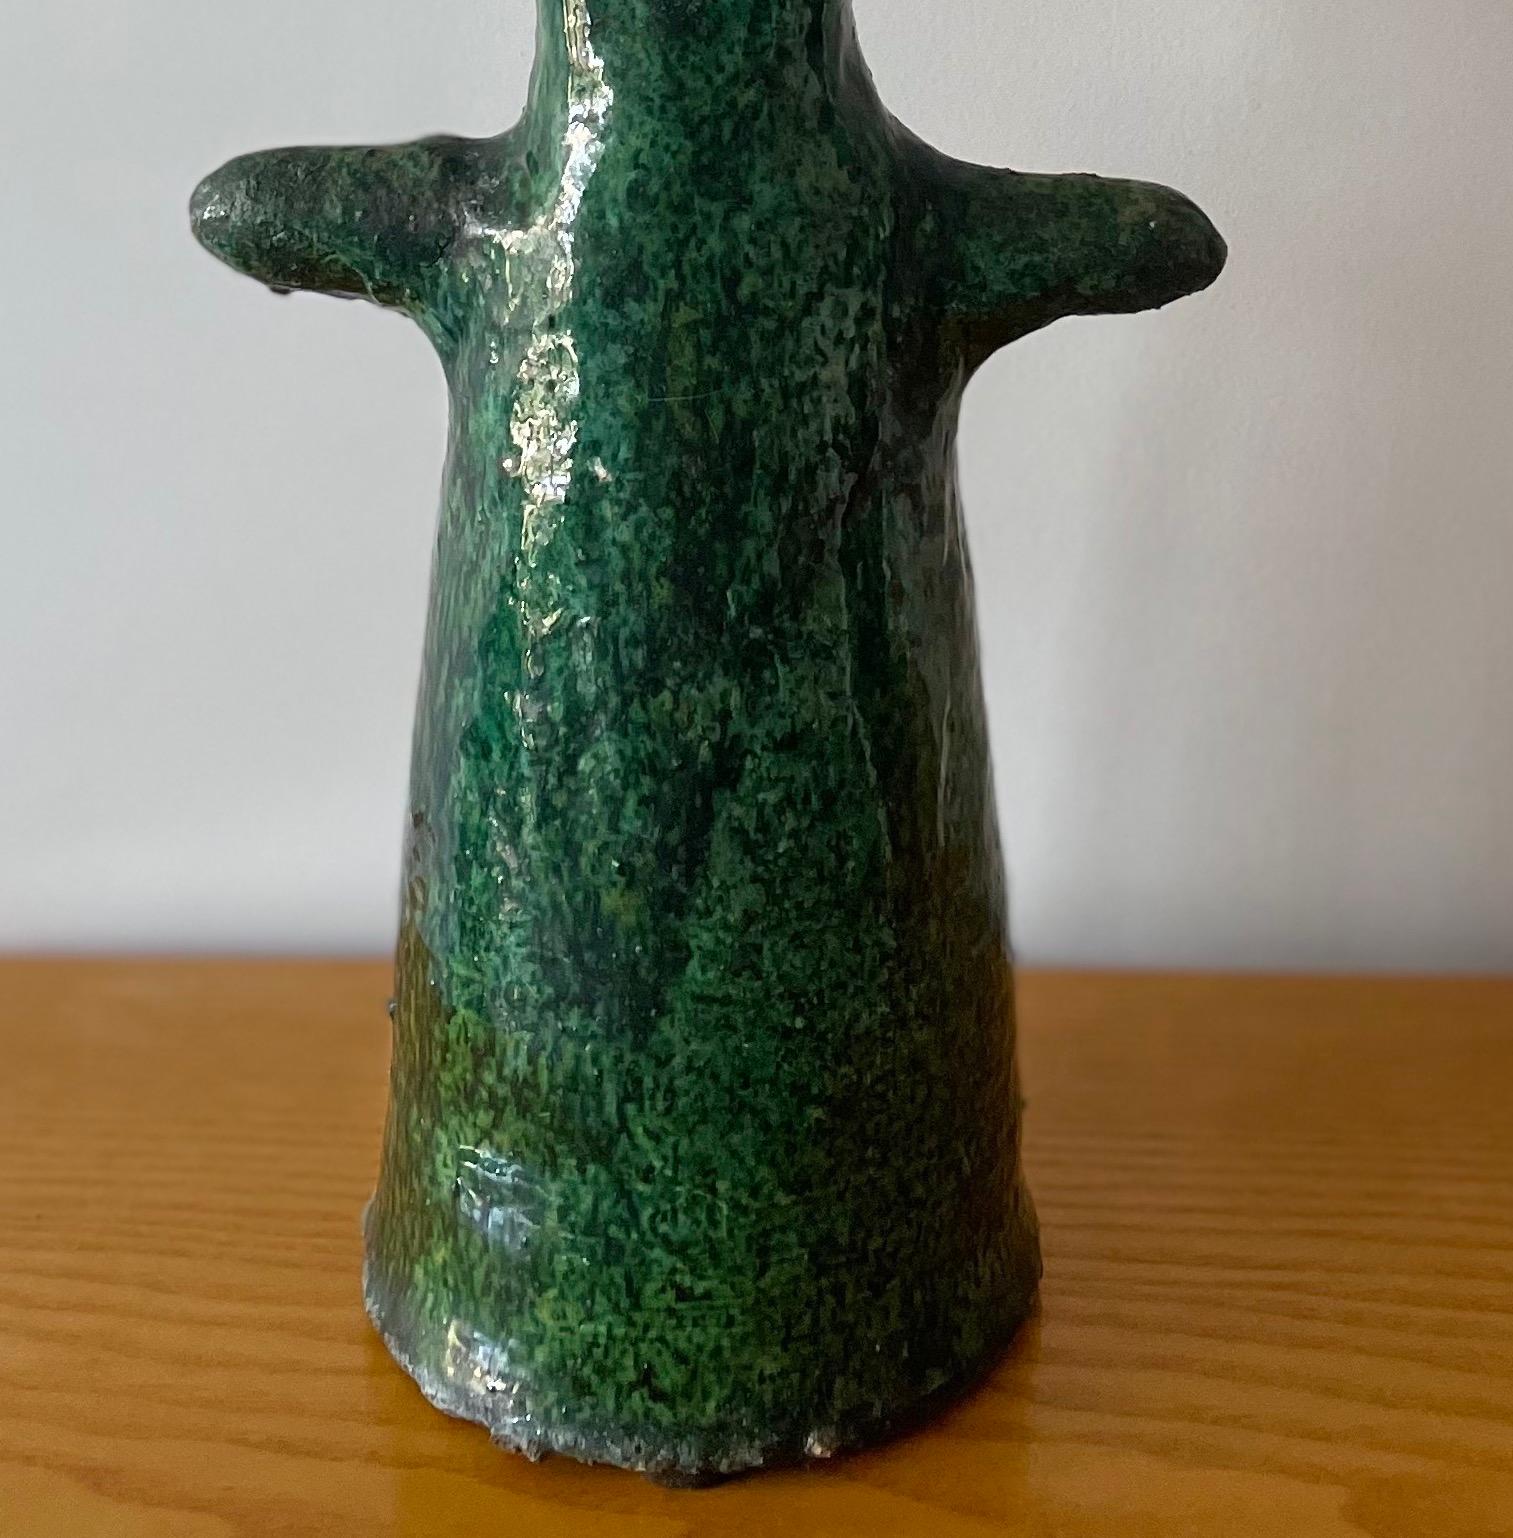 Moroccan Tamegroute Ceramic Vase Sculpture

This vintage handcrafted green enameled vase is a mere sculpture from Southern Moroccan village of Tamegroute, where skilled potters have practiced local techniques that have been passed down through